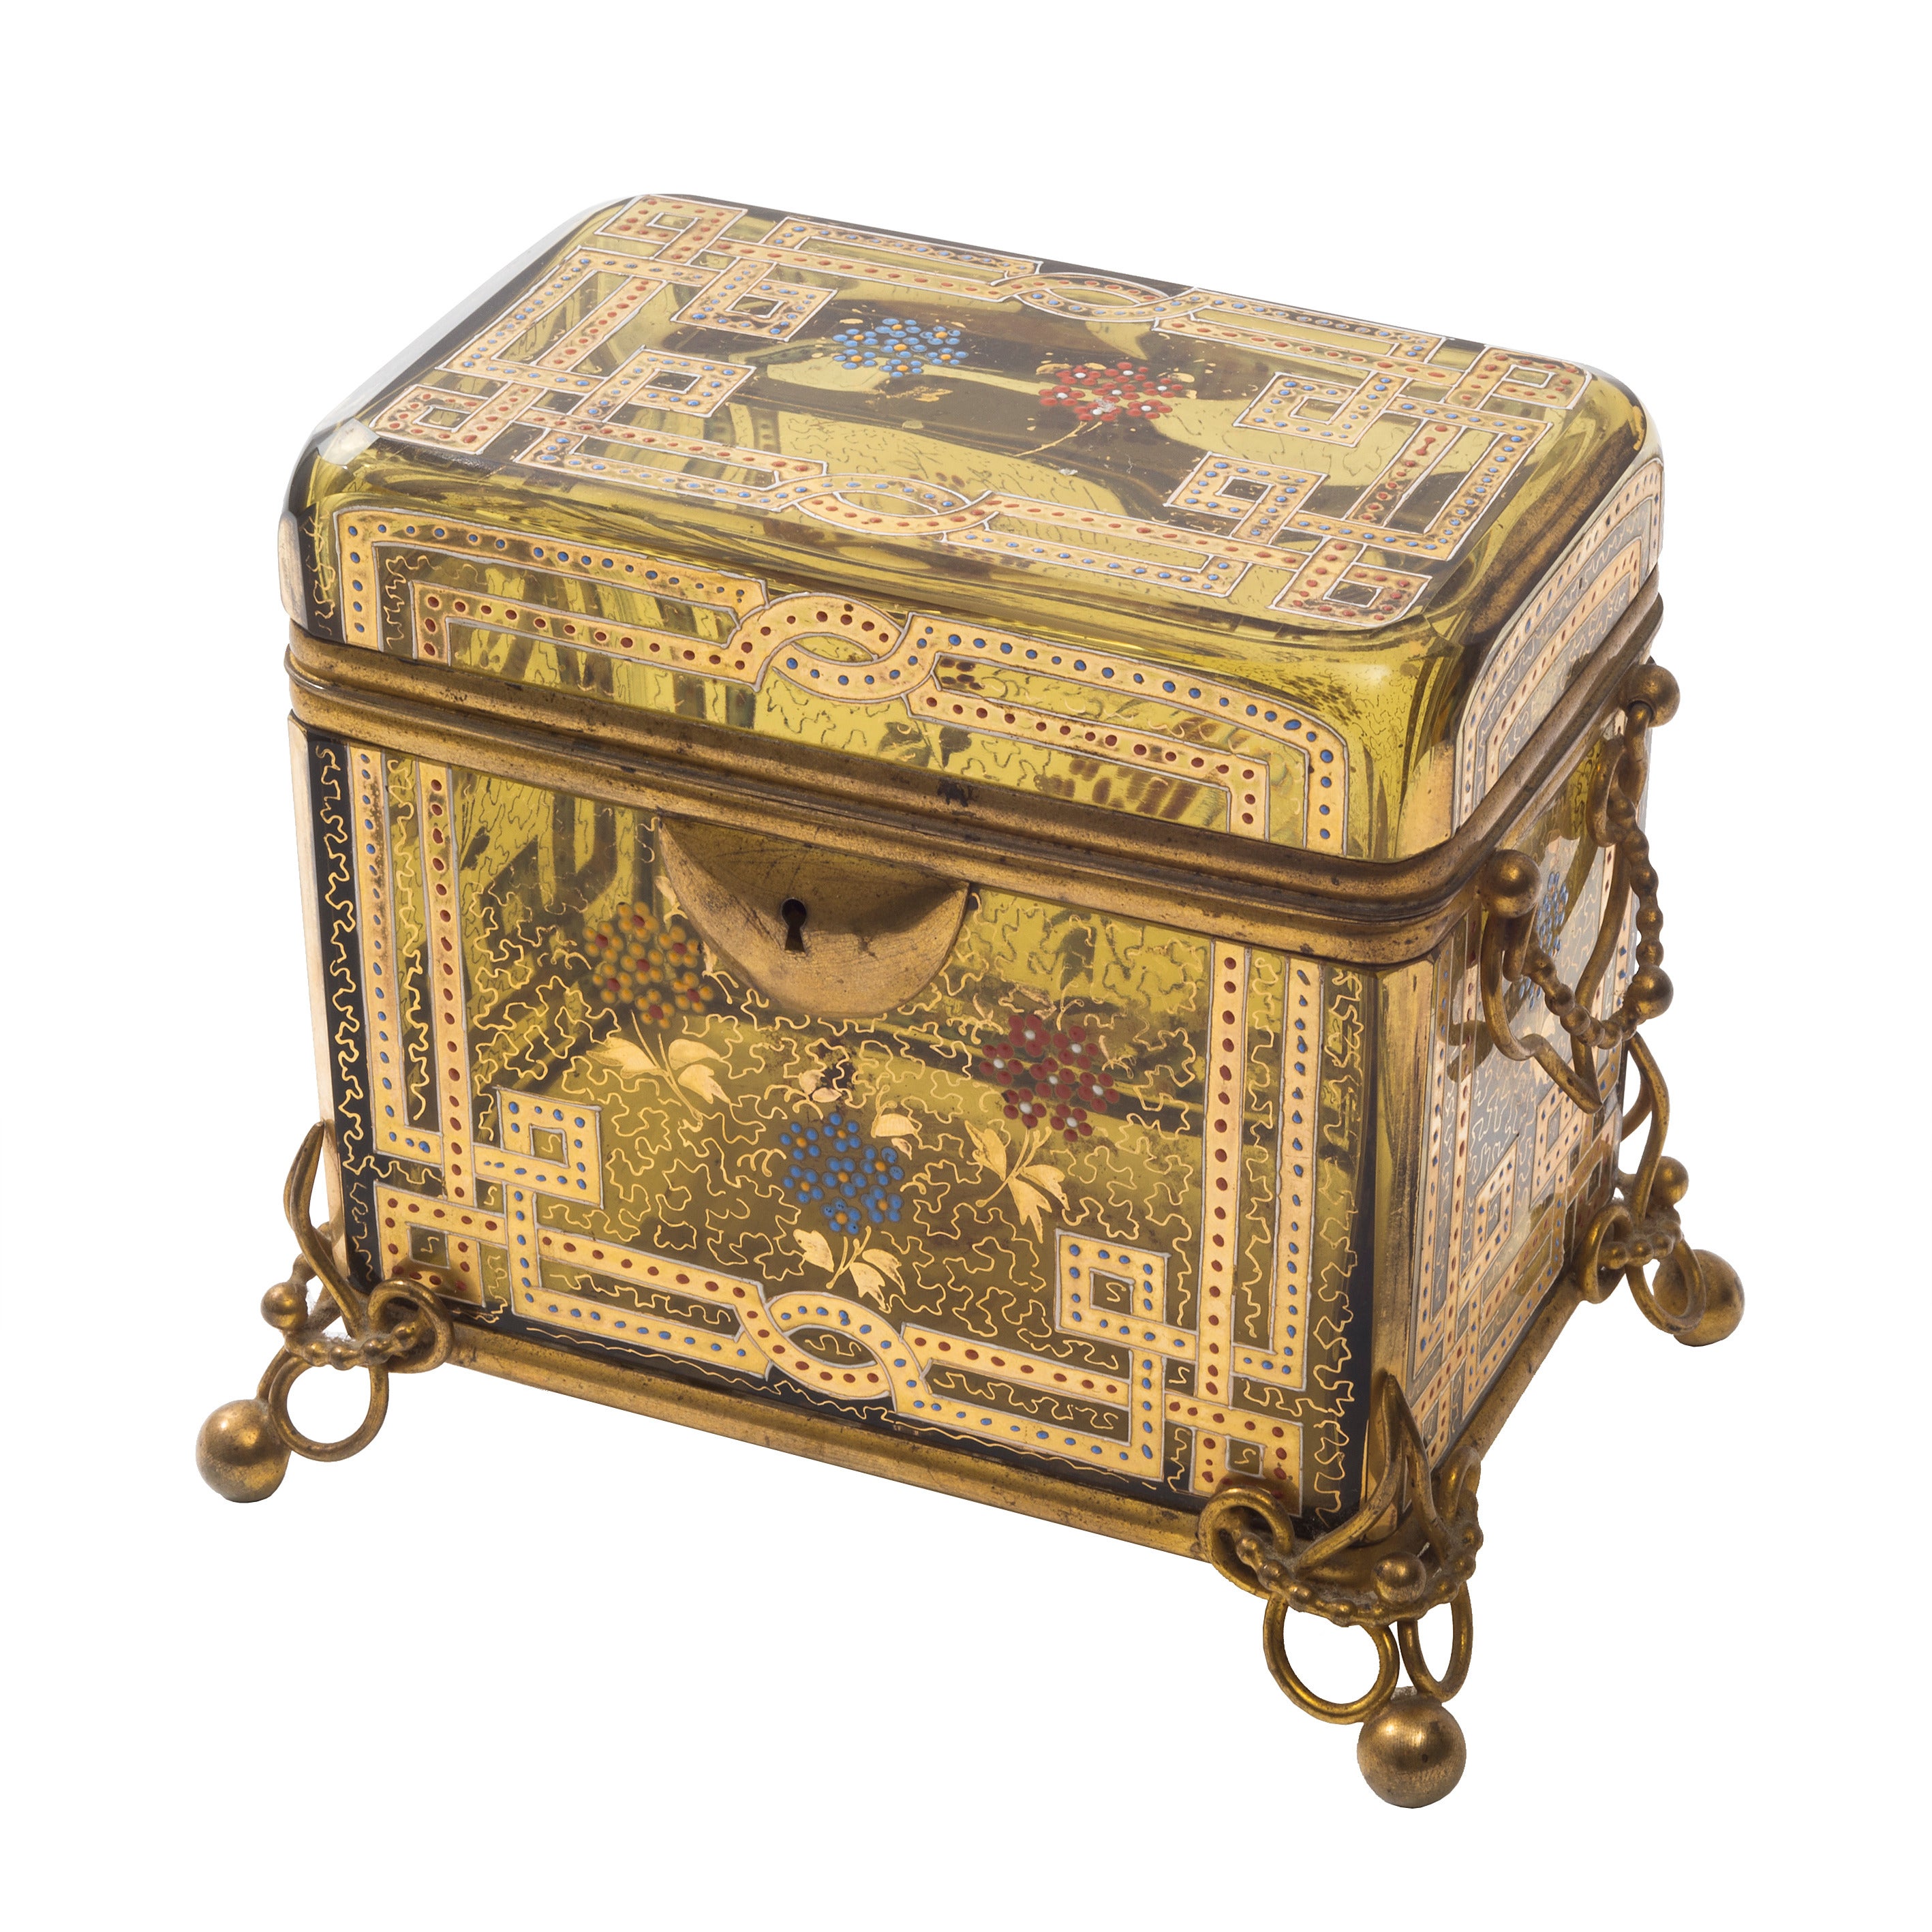 Unusual Pale Amber Bohemian Glass Casket with Gilt Overlay 19th Century